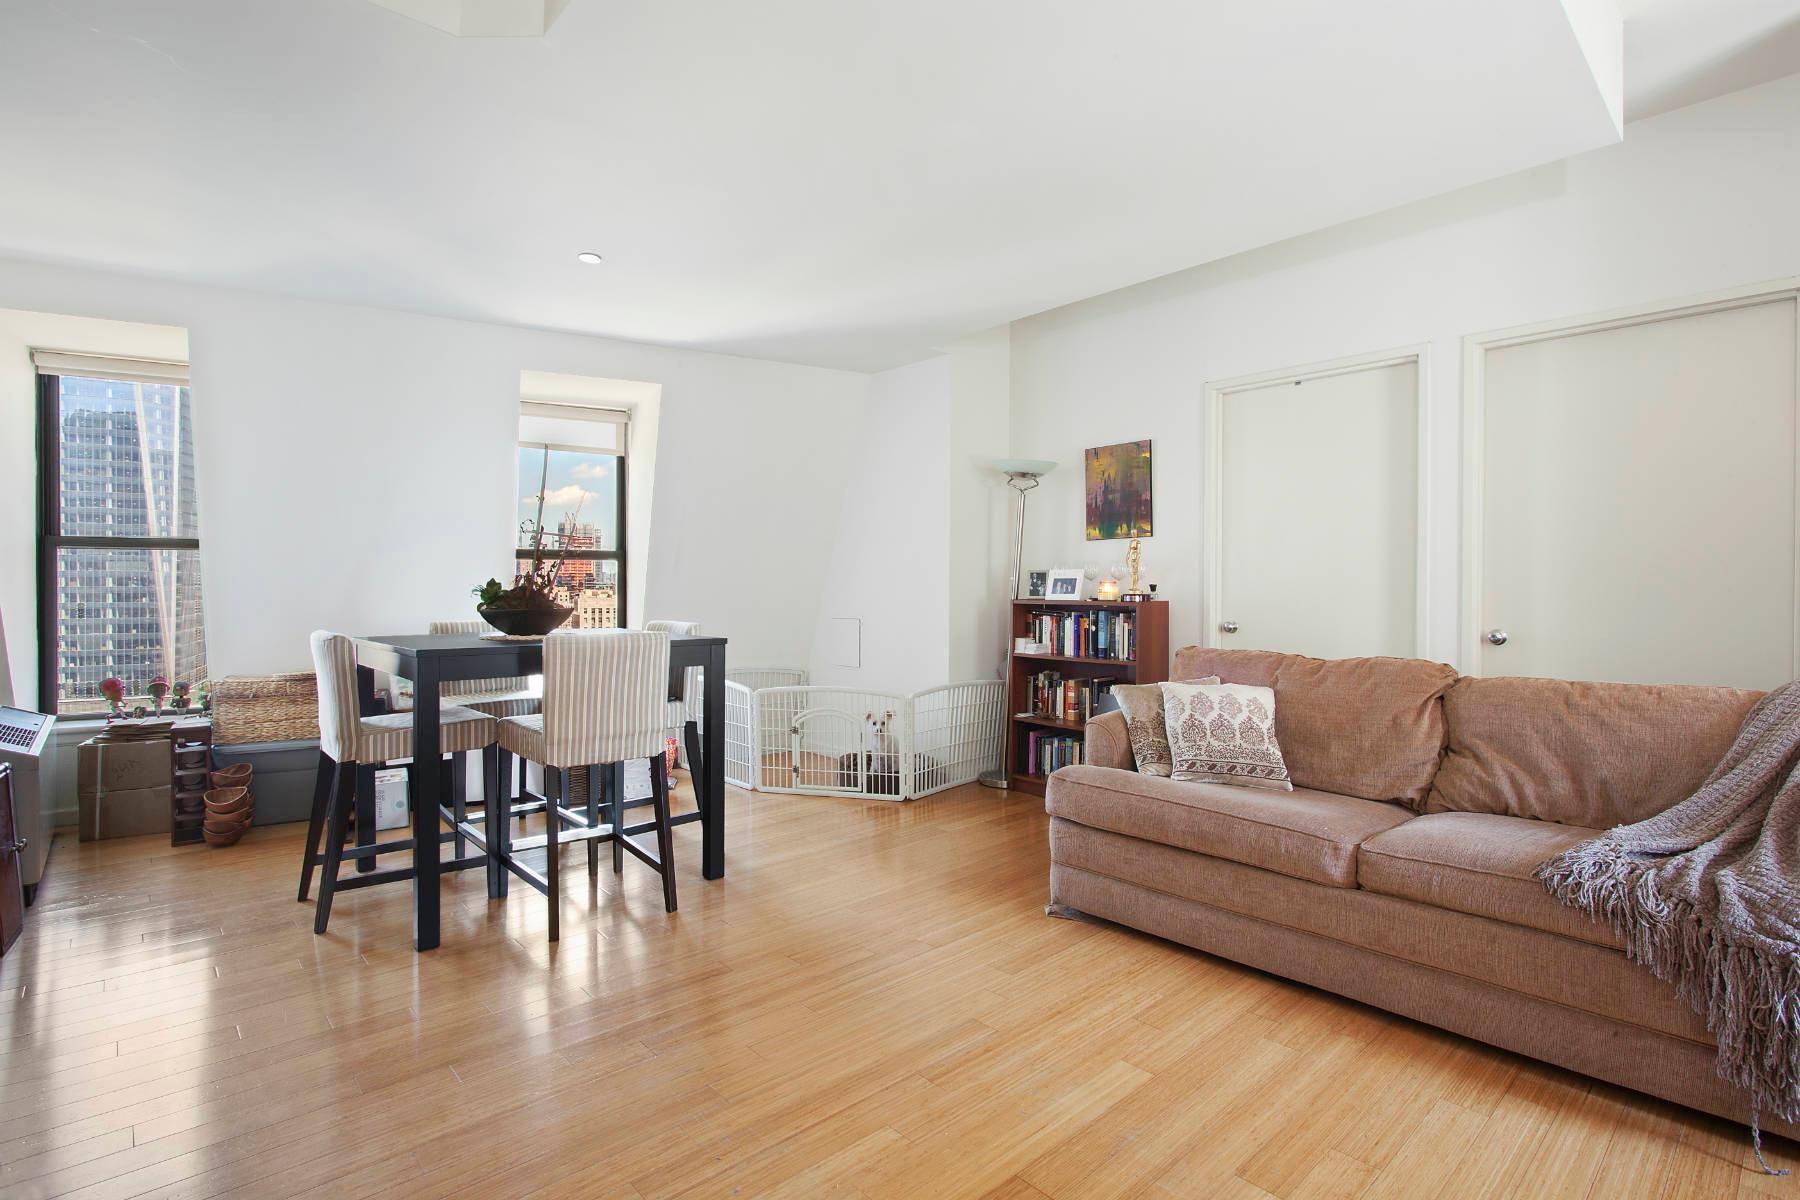 NO BROKER FEE**FINANCIAL DISTRICT'S LUXURY RENTALS AT IT'S FINEST** 